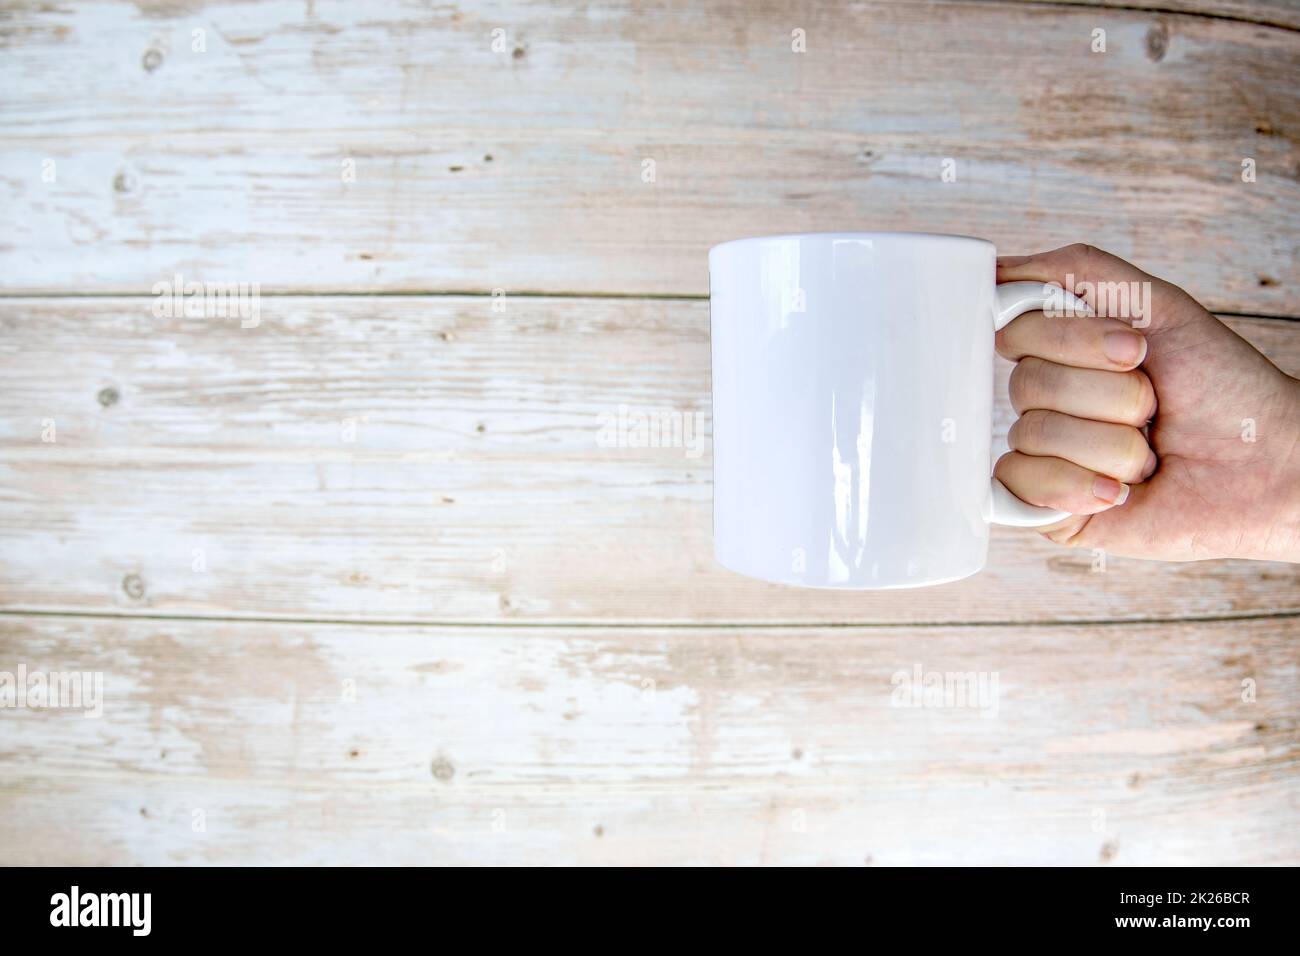 Hand holding a ceramic mug blank on wooden background with copy space Stock Photo